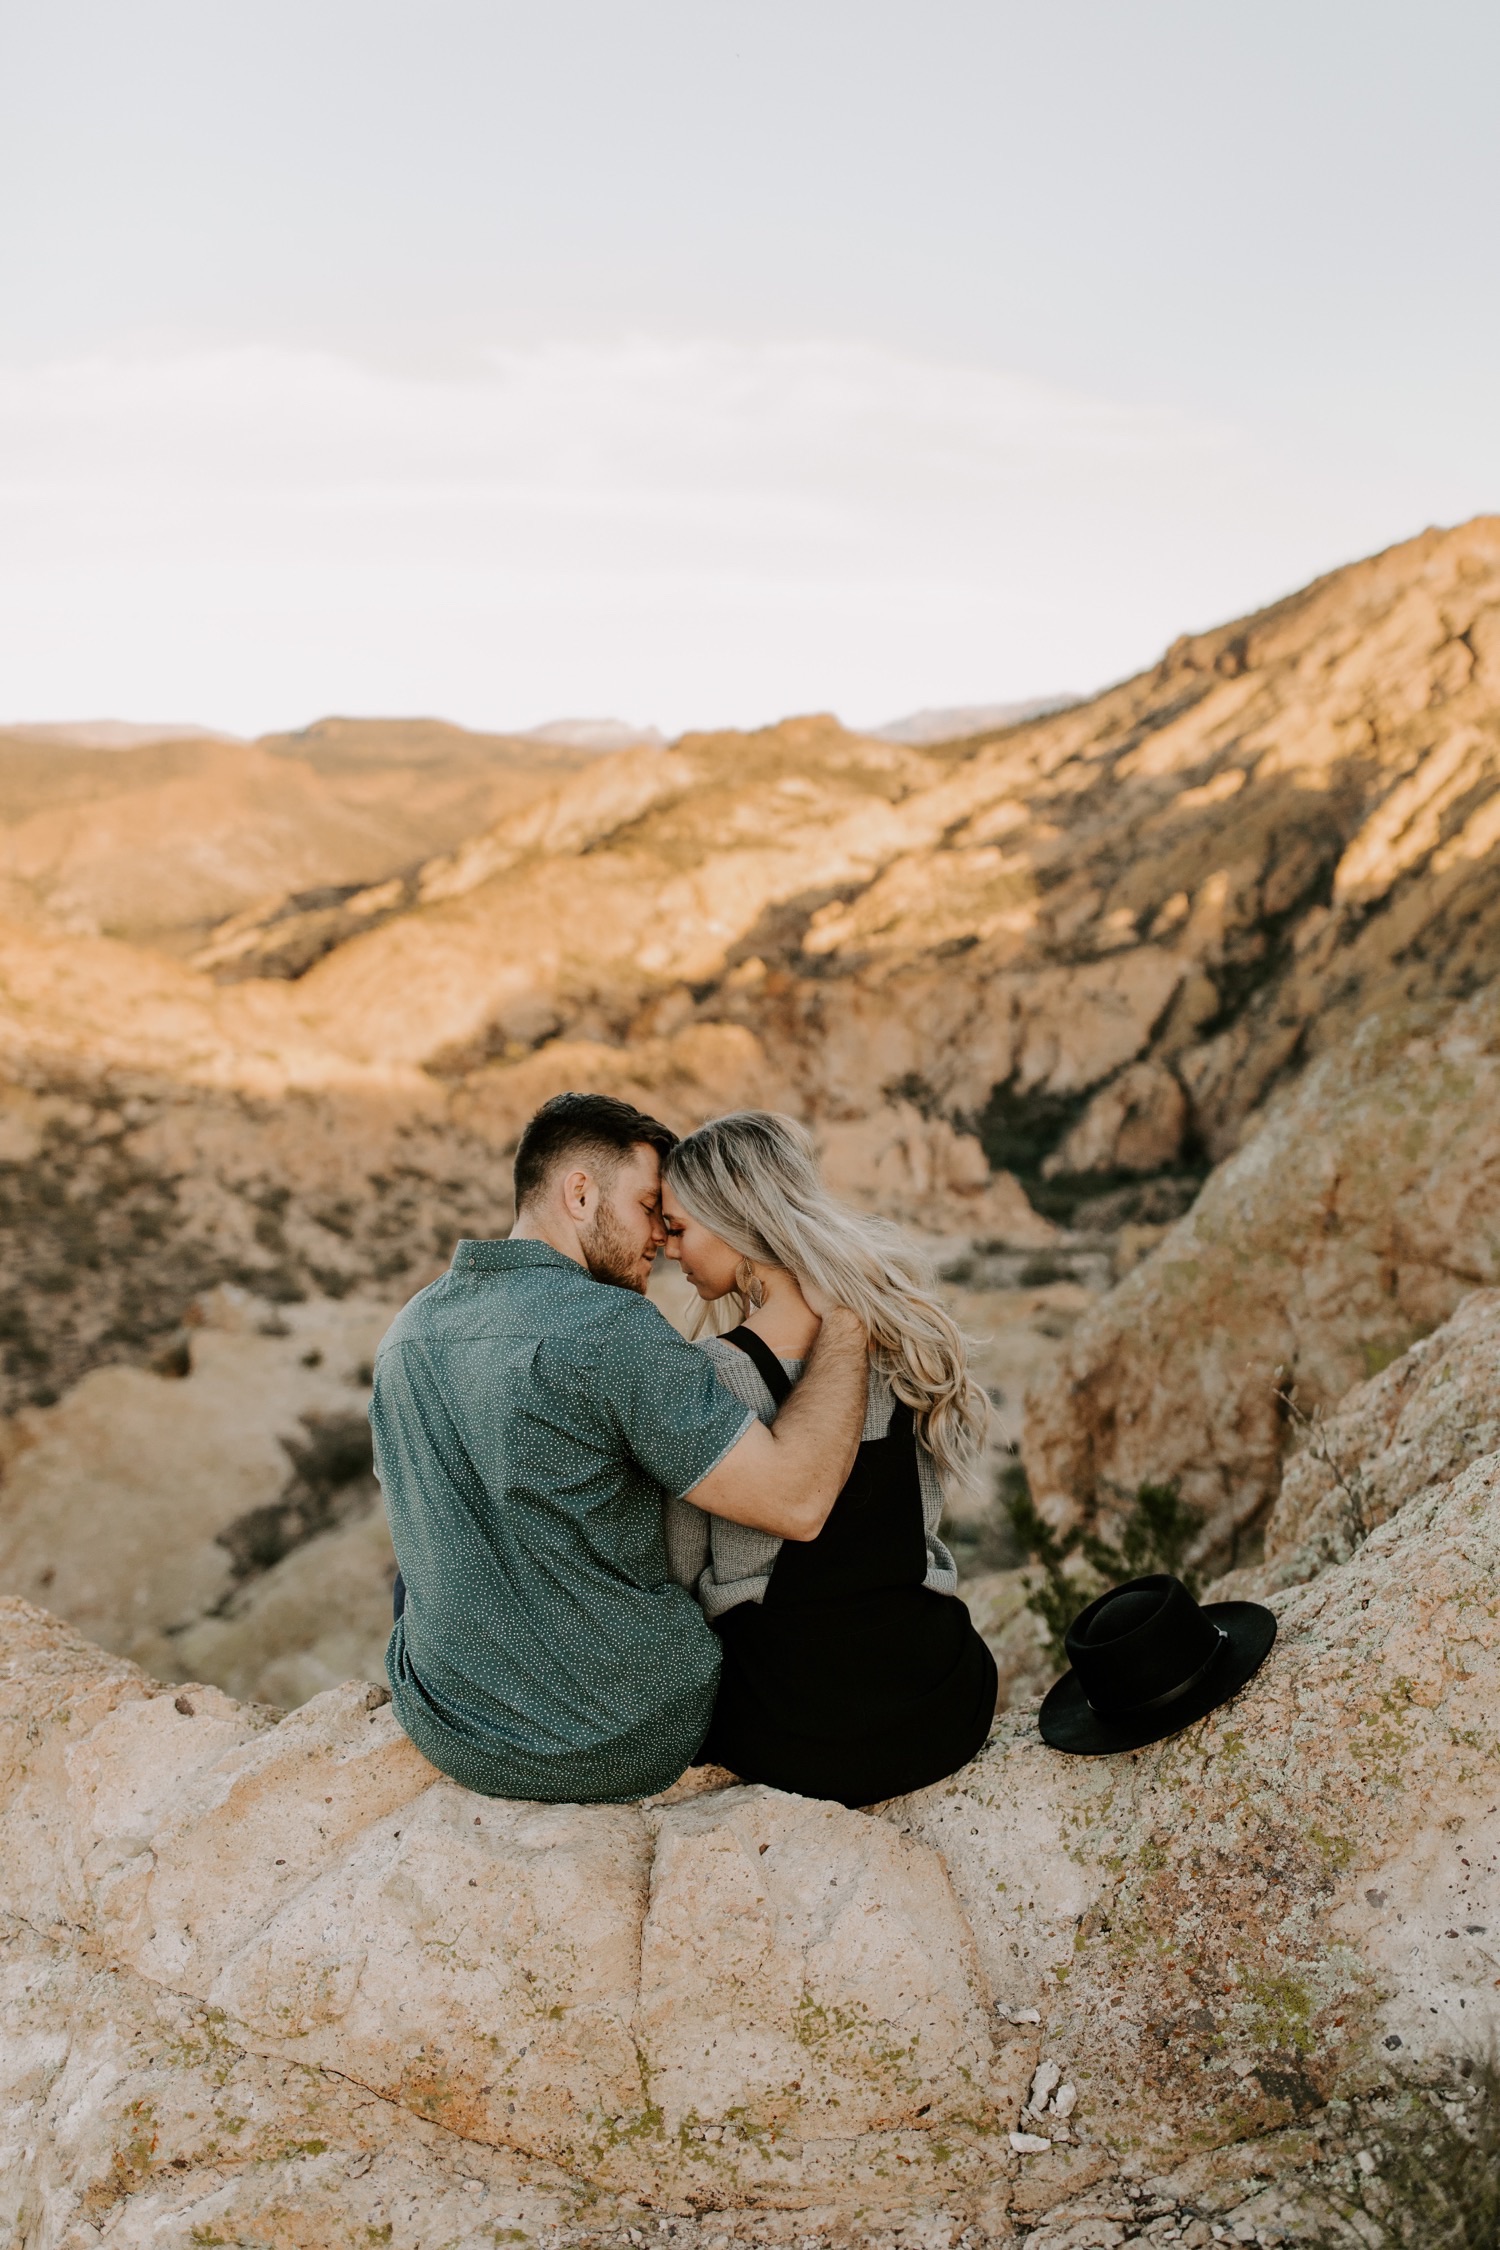 Desert mountain views for this couples engagement session in the Arizona